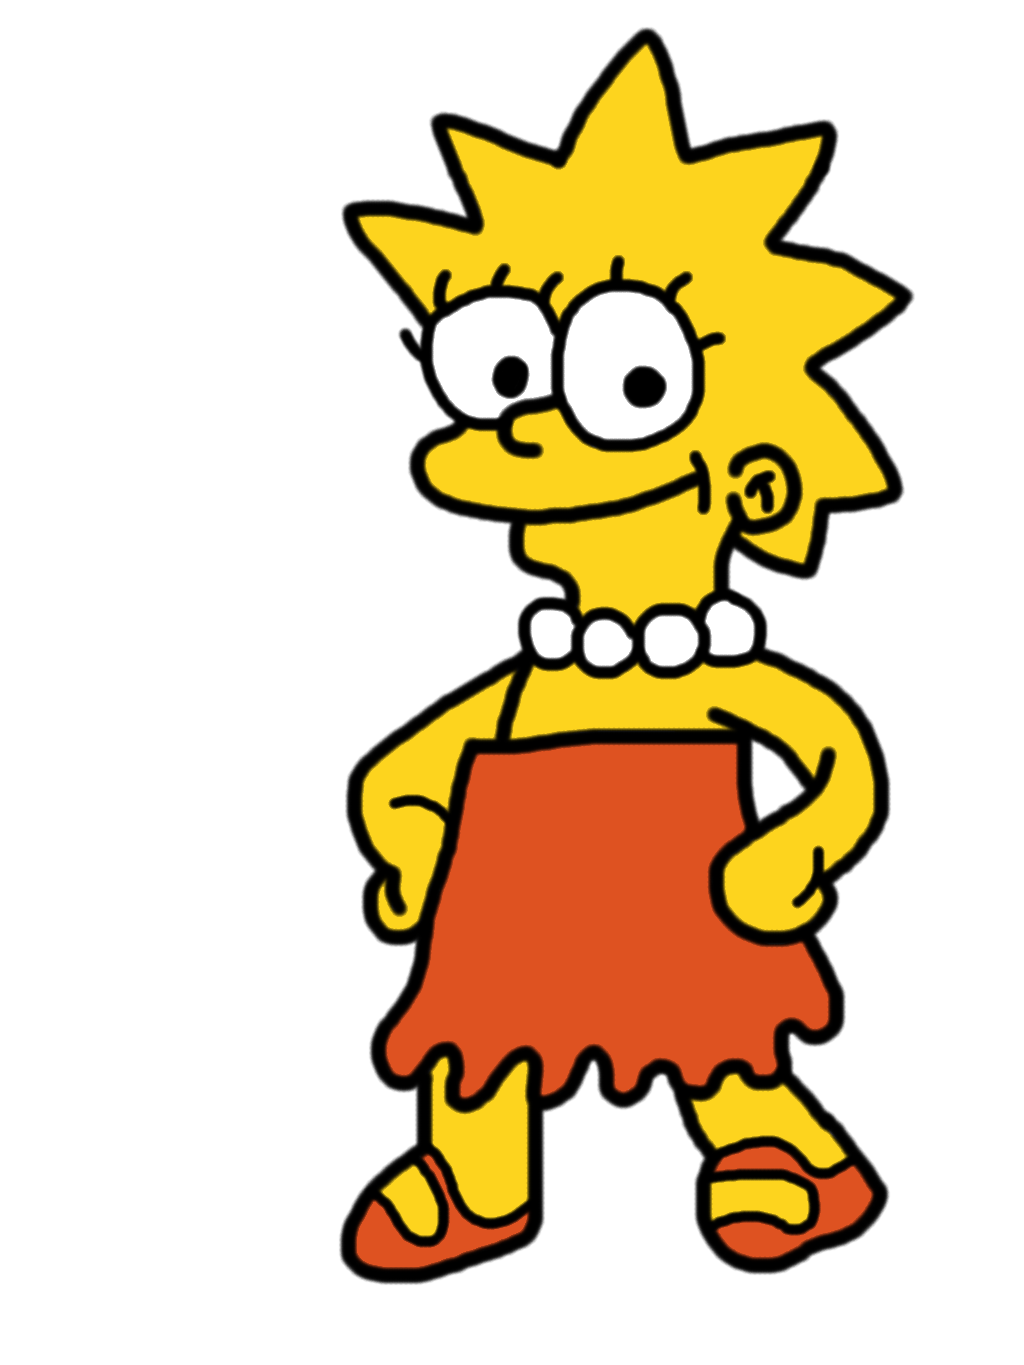 Lisa Simpson (Full Body) (colored) by IAmAutism on DeviantArt